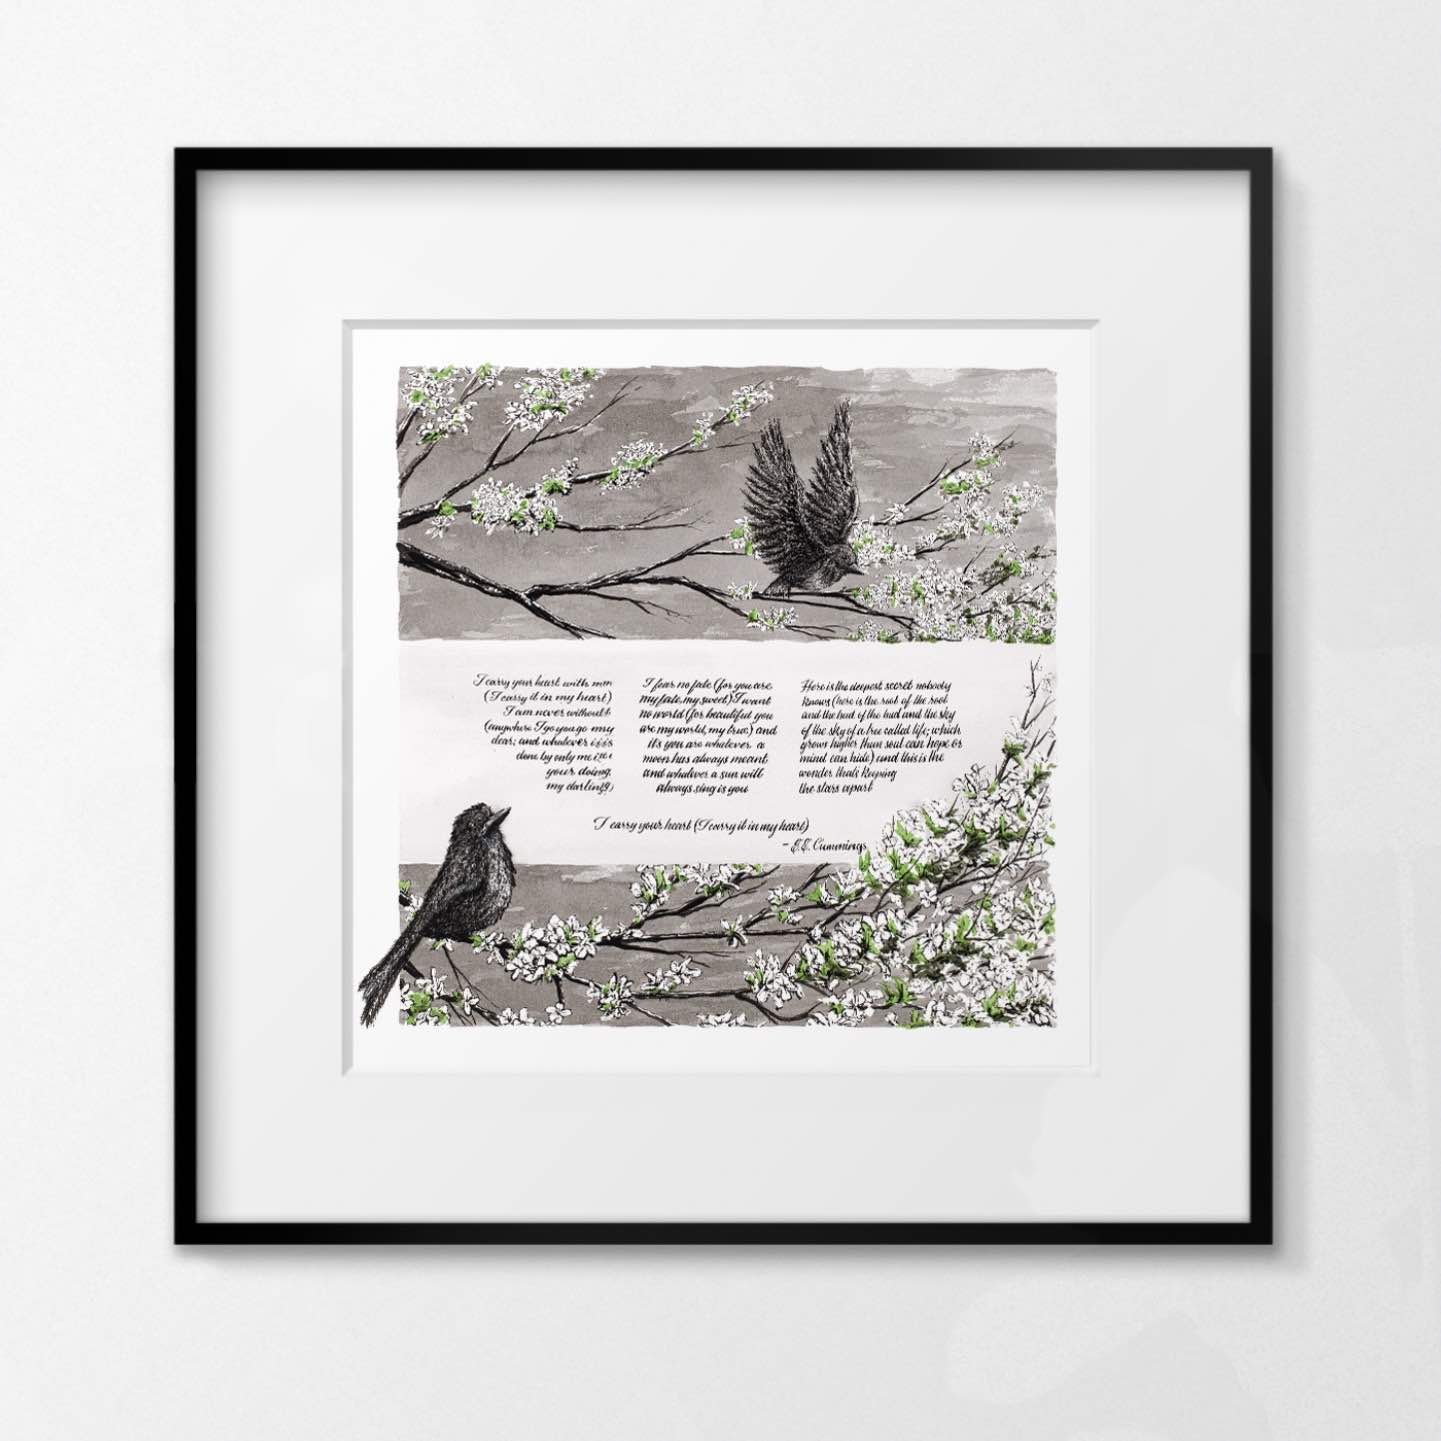 Pair of Birds Gold Leaf Accent Ketubah Grayscale Fall Spring Season Nature Windthrow Asheville North Carolina Jewish Wedding Vow Art.jpg